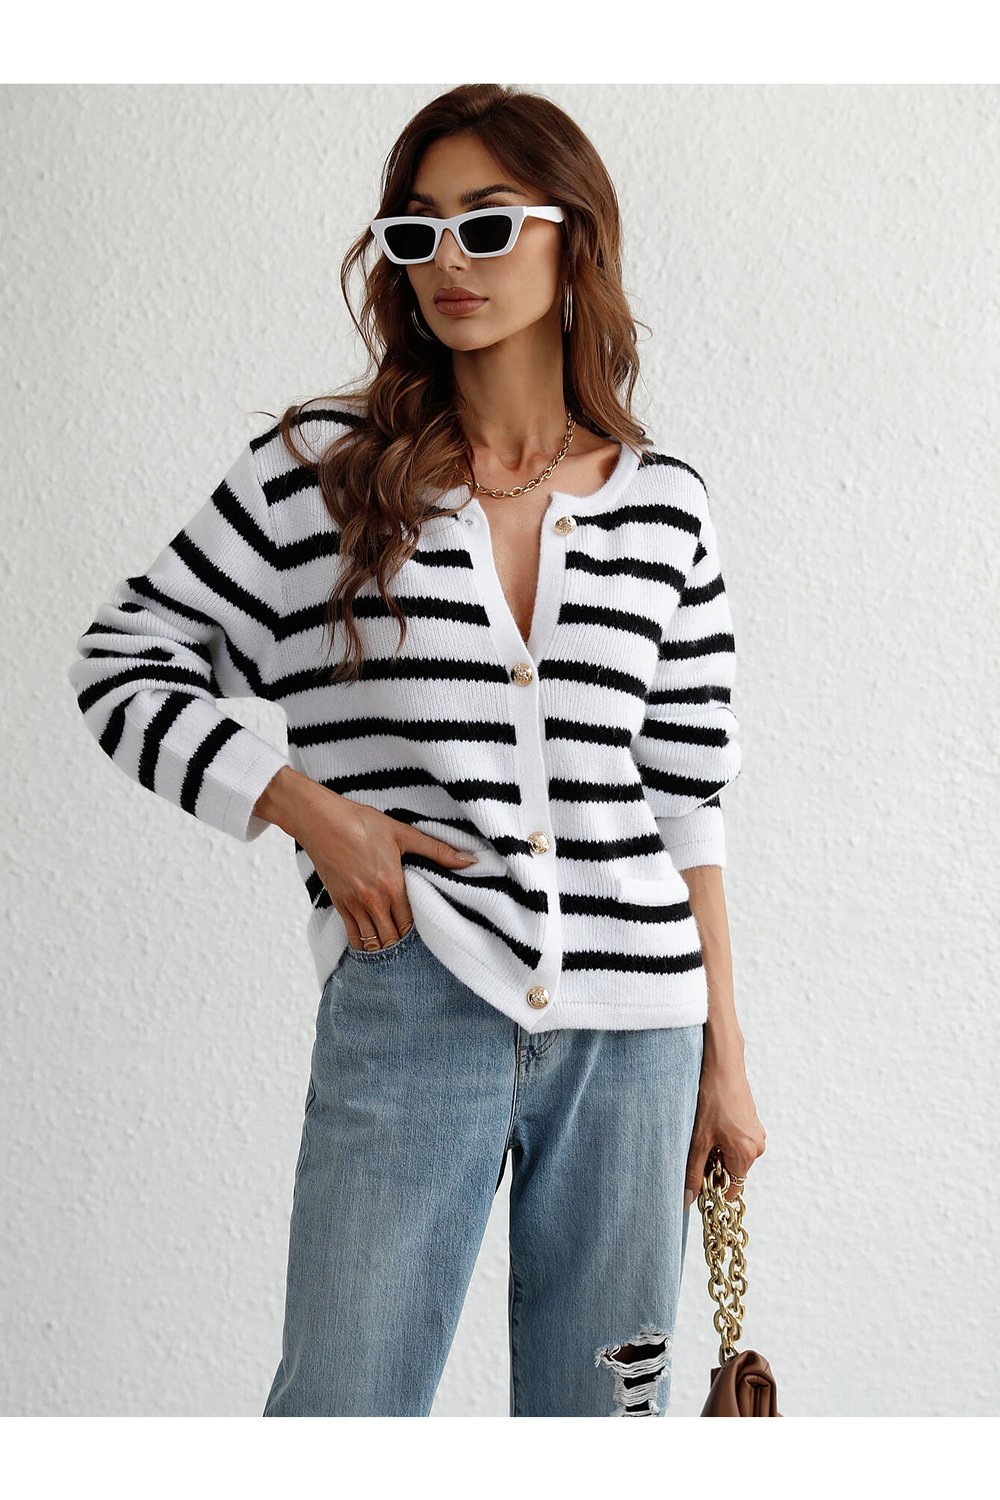 Striped Button Front Cardigan - Cardigans - FITGGINS